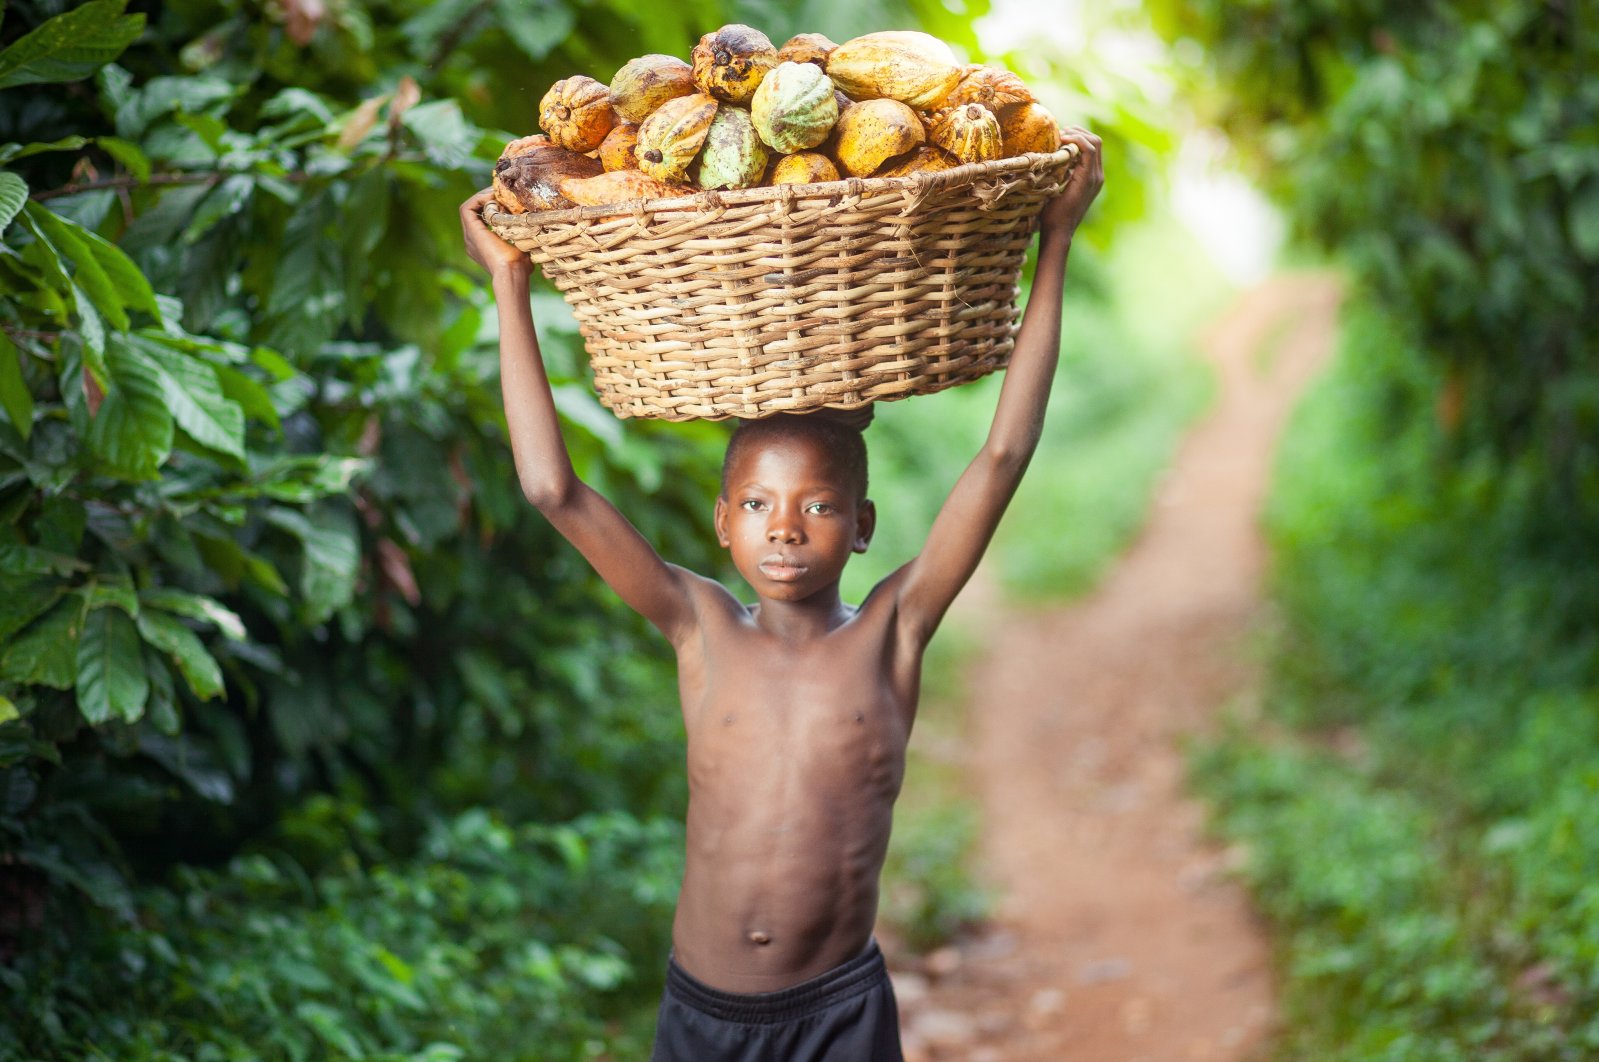 A little boy carrying a basket of harvested cocoa pods, Mankranso, Ghana, June 14, 2018. (Shutterstock Photo)